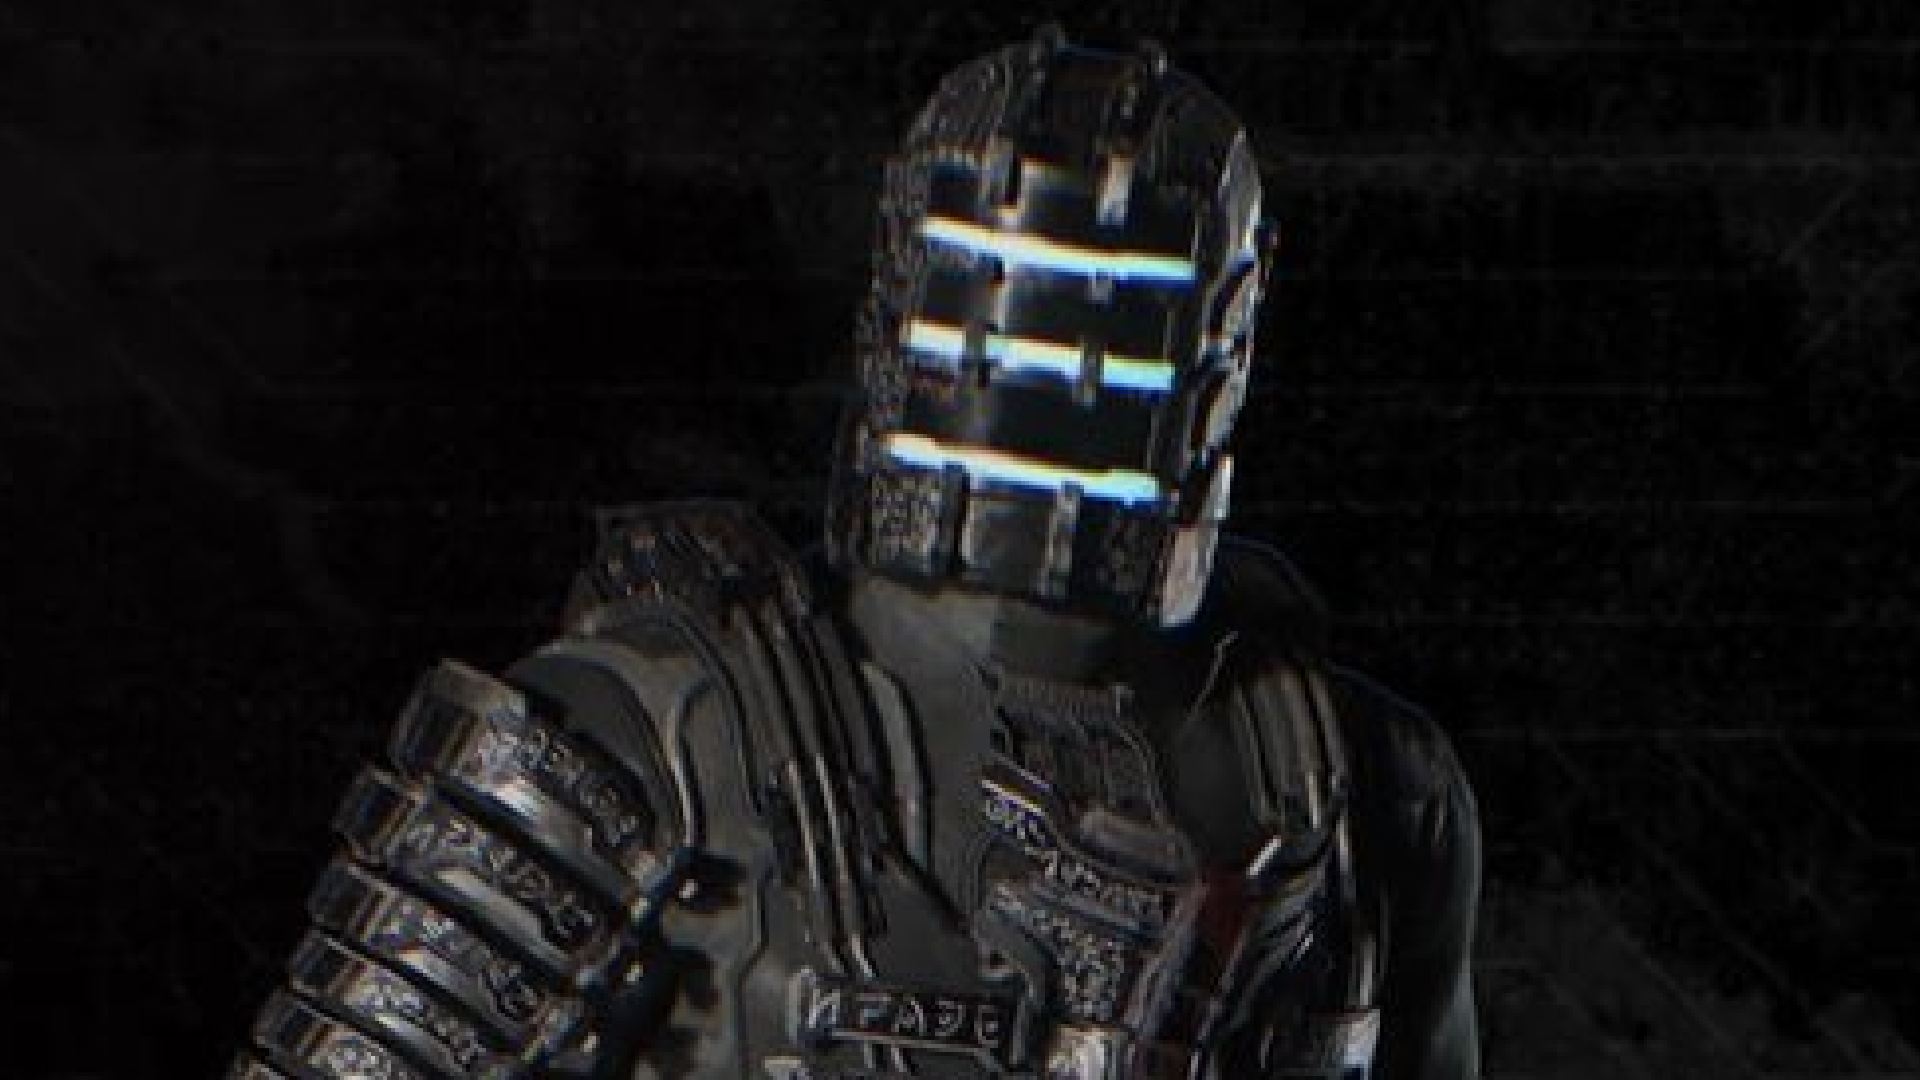 All Suits in Dead Space Remake